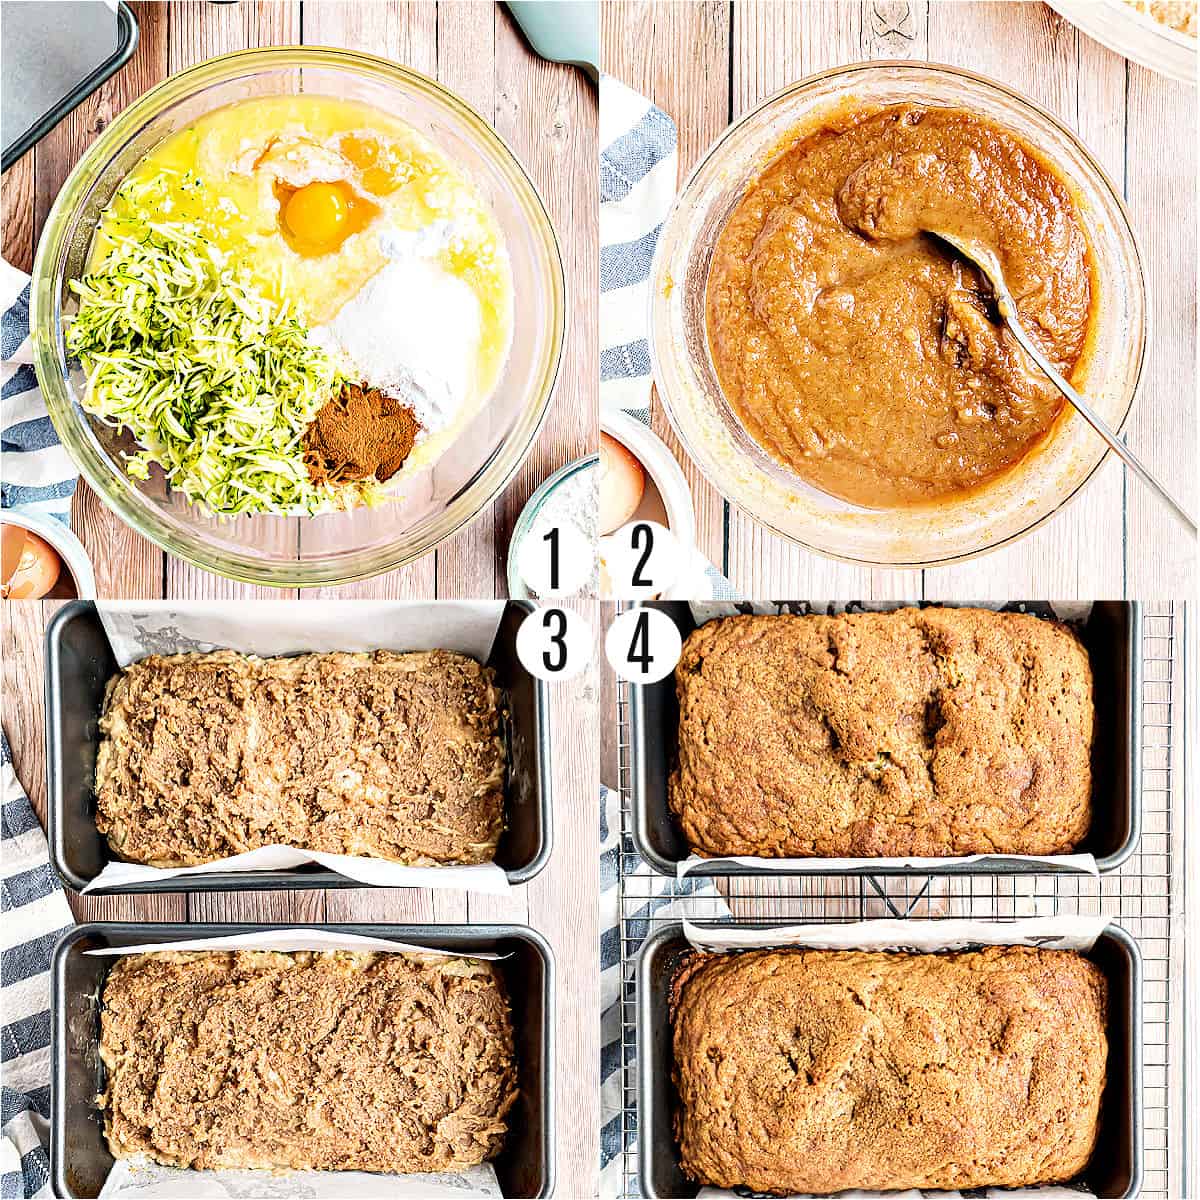 Step by step photos showing how to make cinnamon swirl zucchini bread.